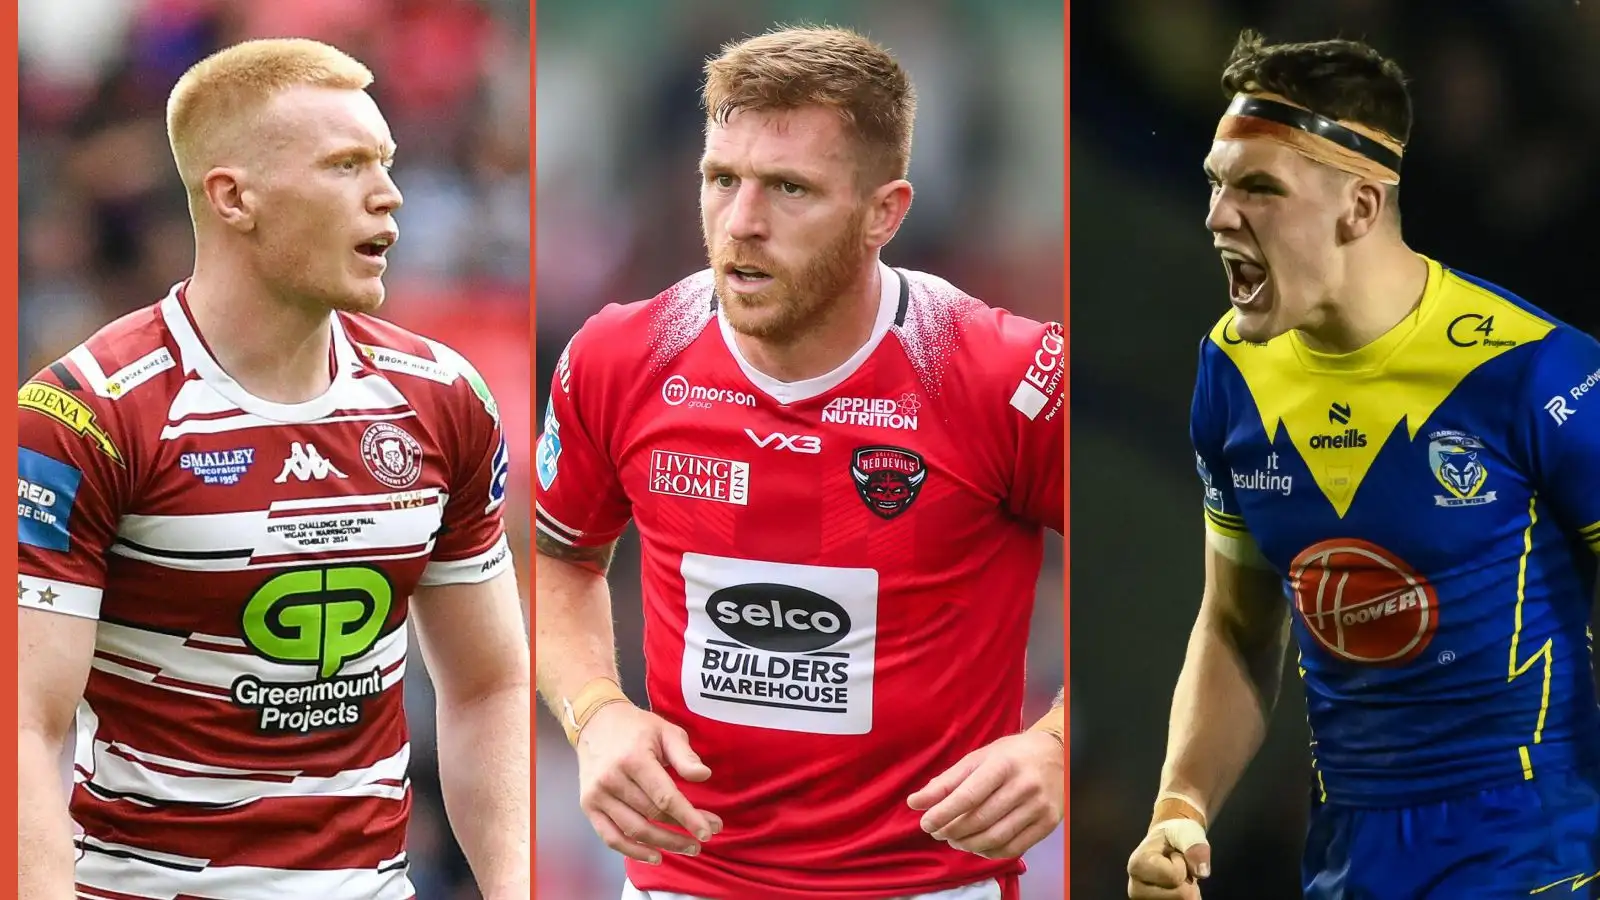 An ultimate 13 of rugby league players born in Oldham including Warrington Wolves, Huddersfield Giants trios